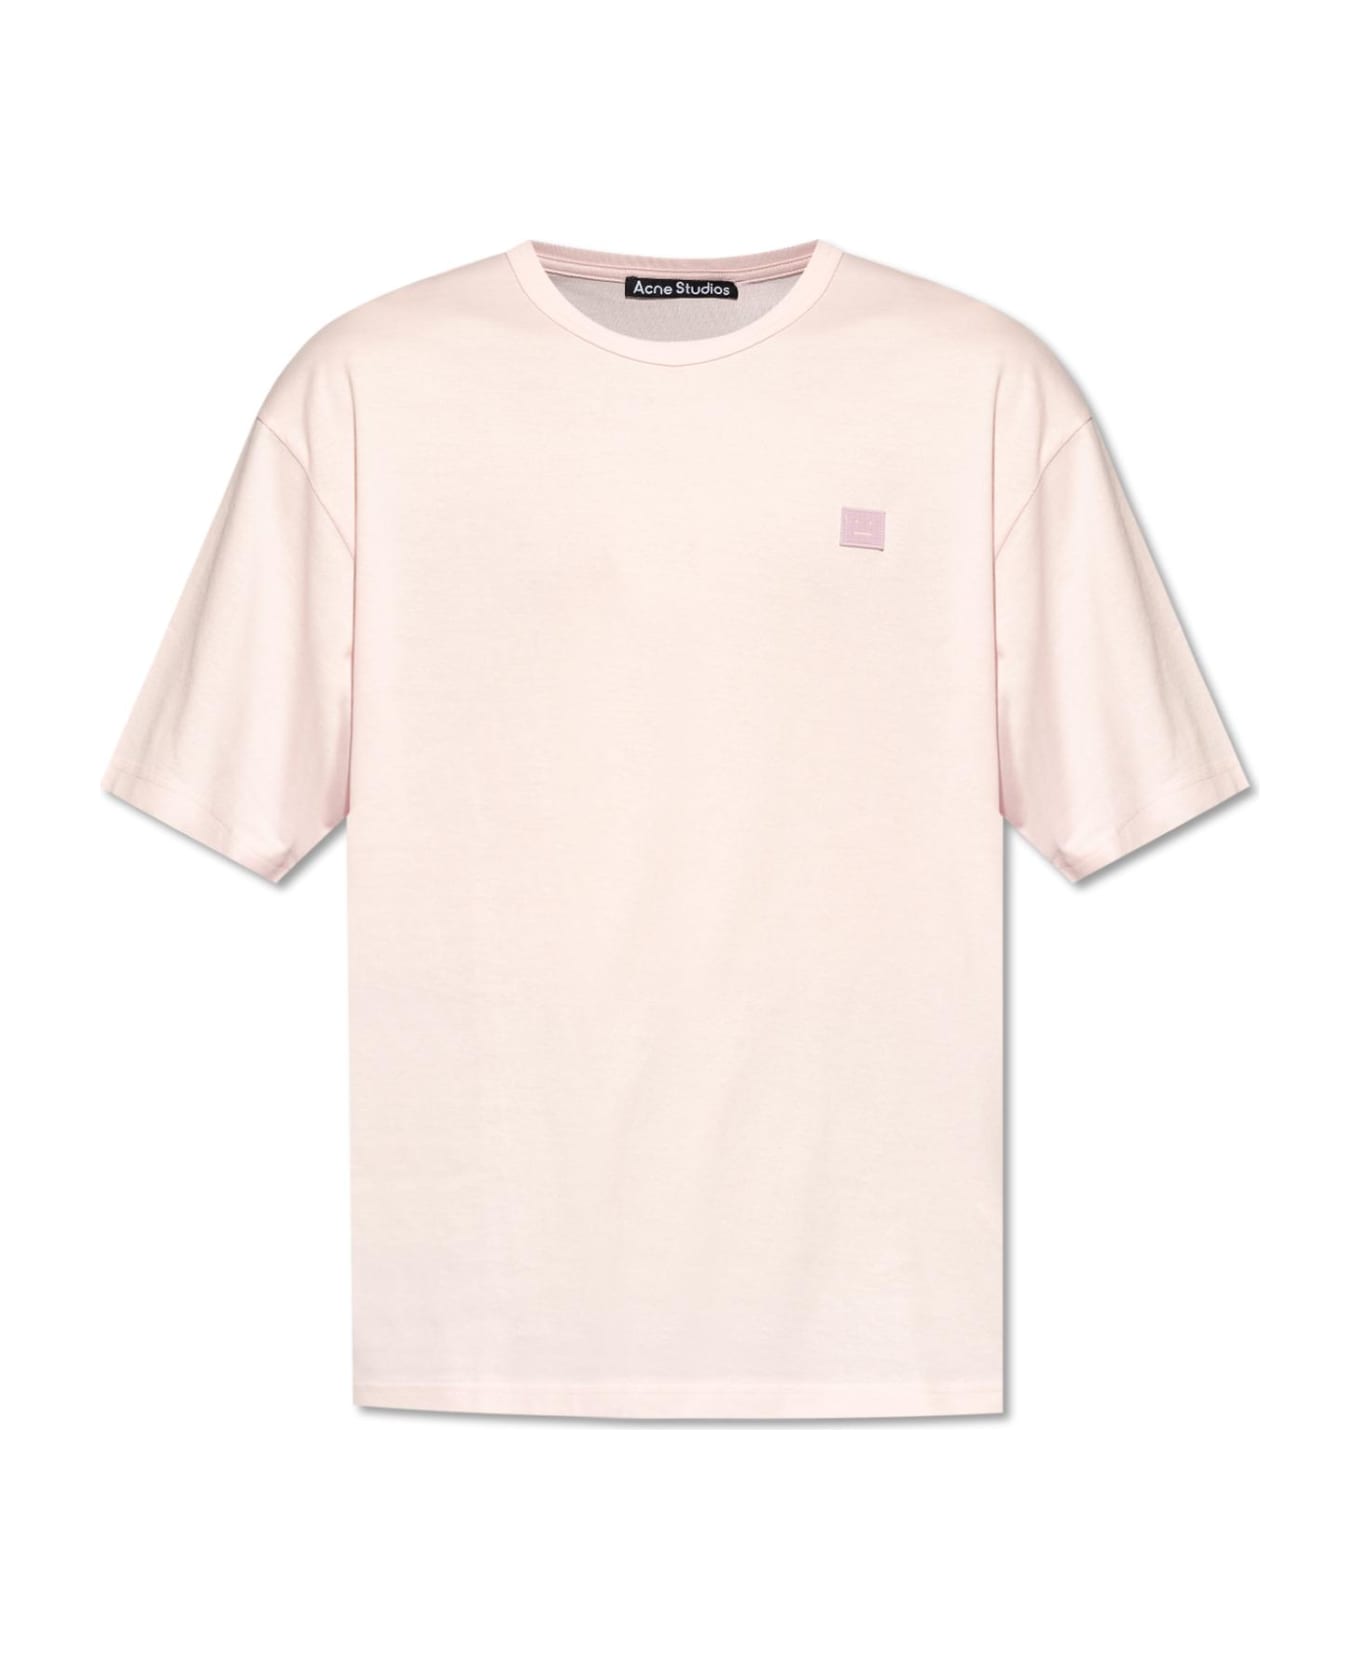 Acne Studios Patched T-shirt - Light Pink